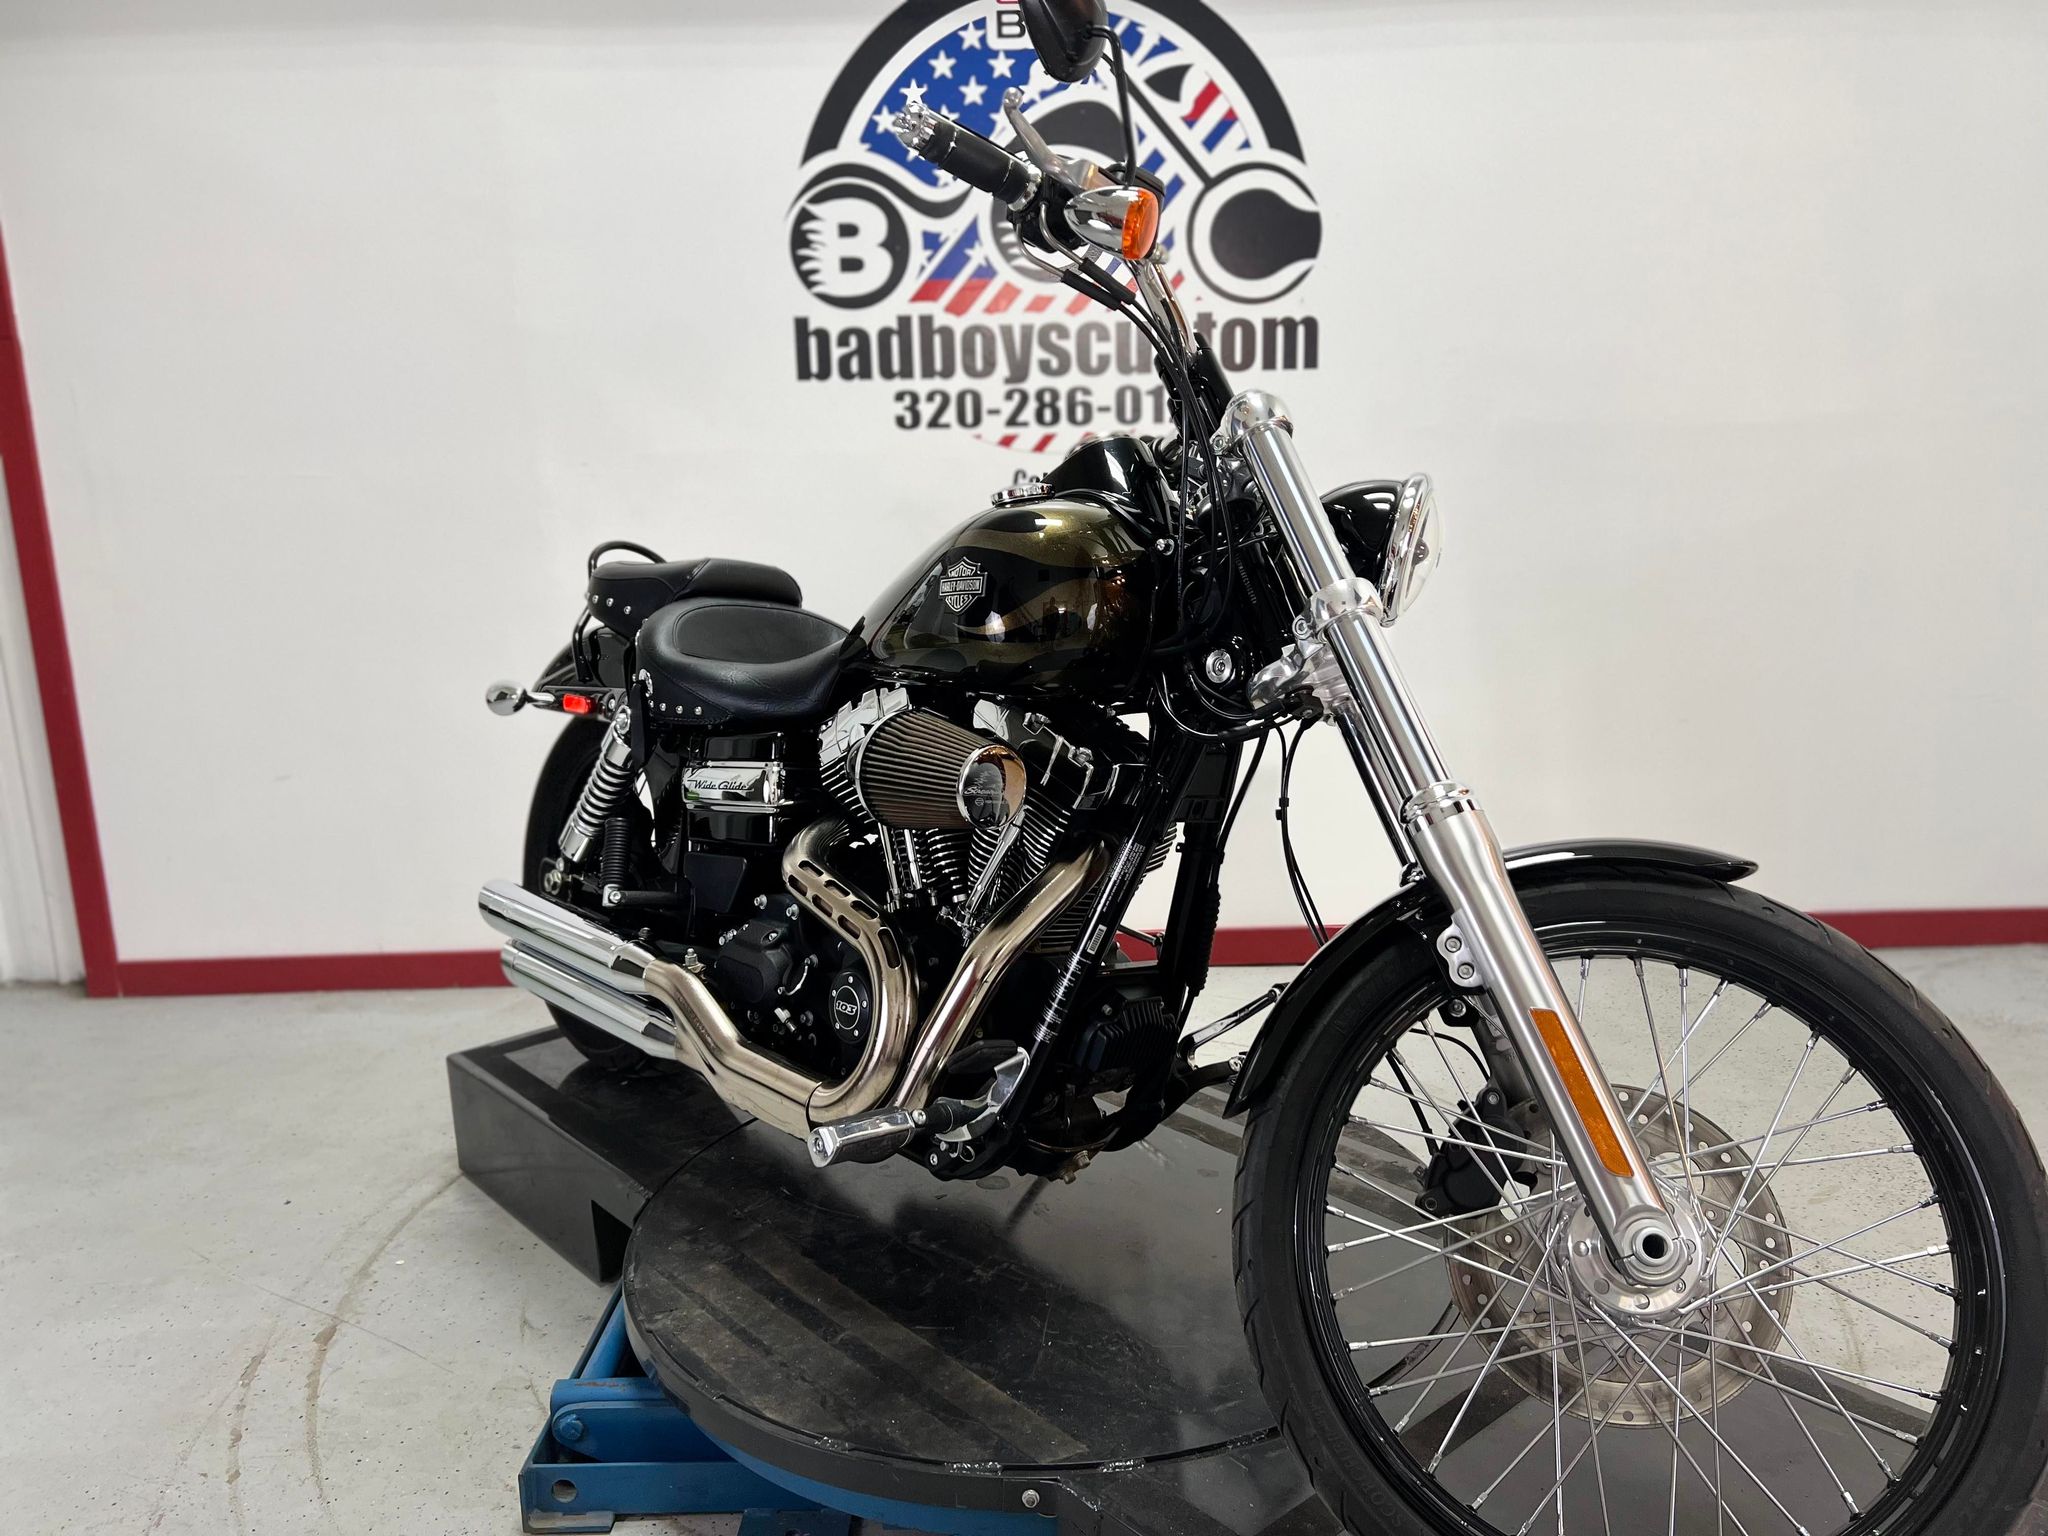 2015 Wide Glide FXDWG 103 Edition